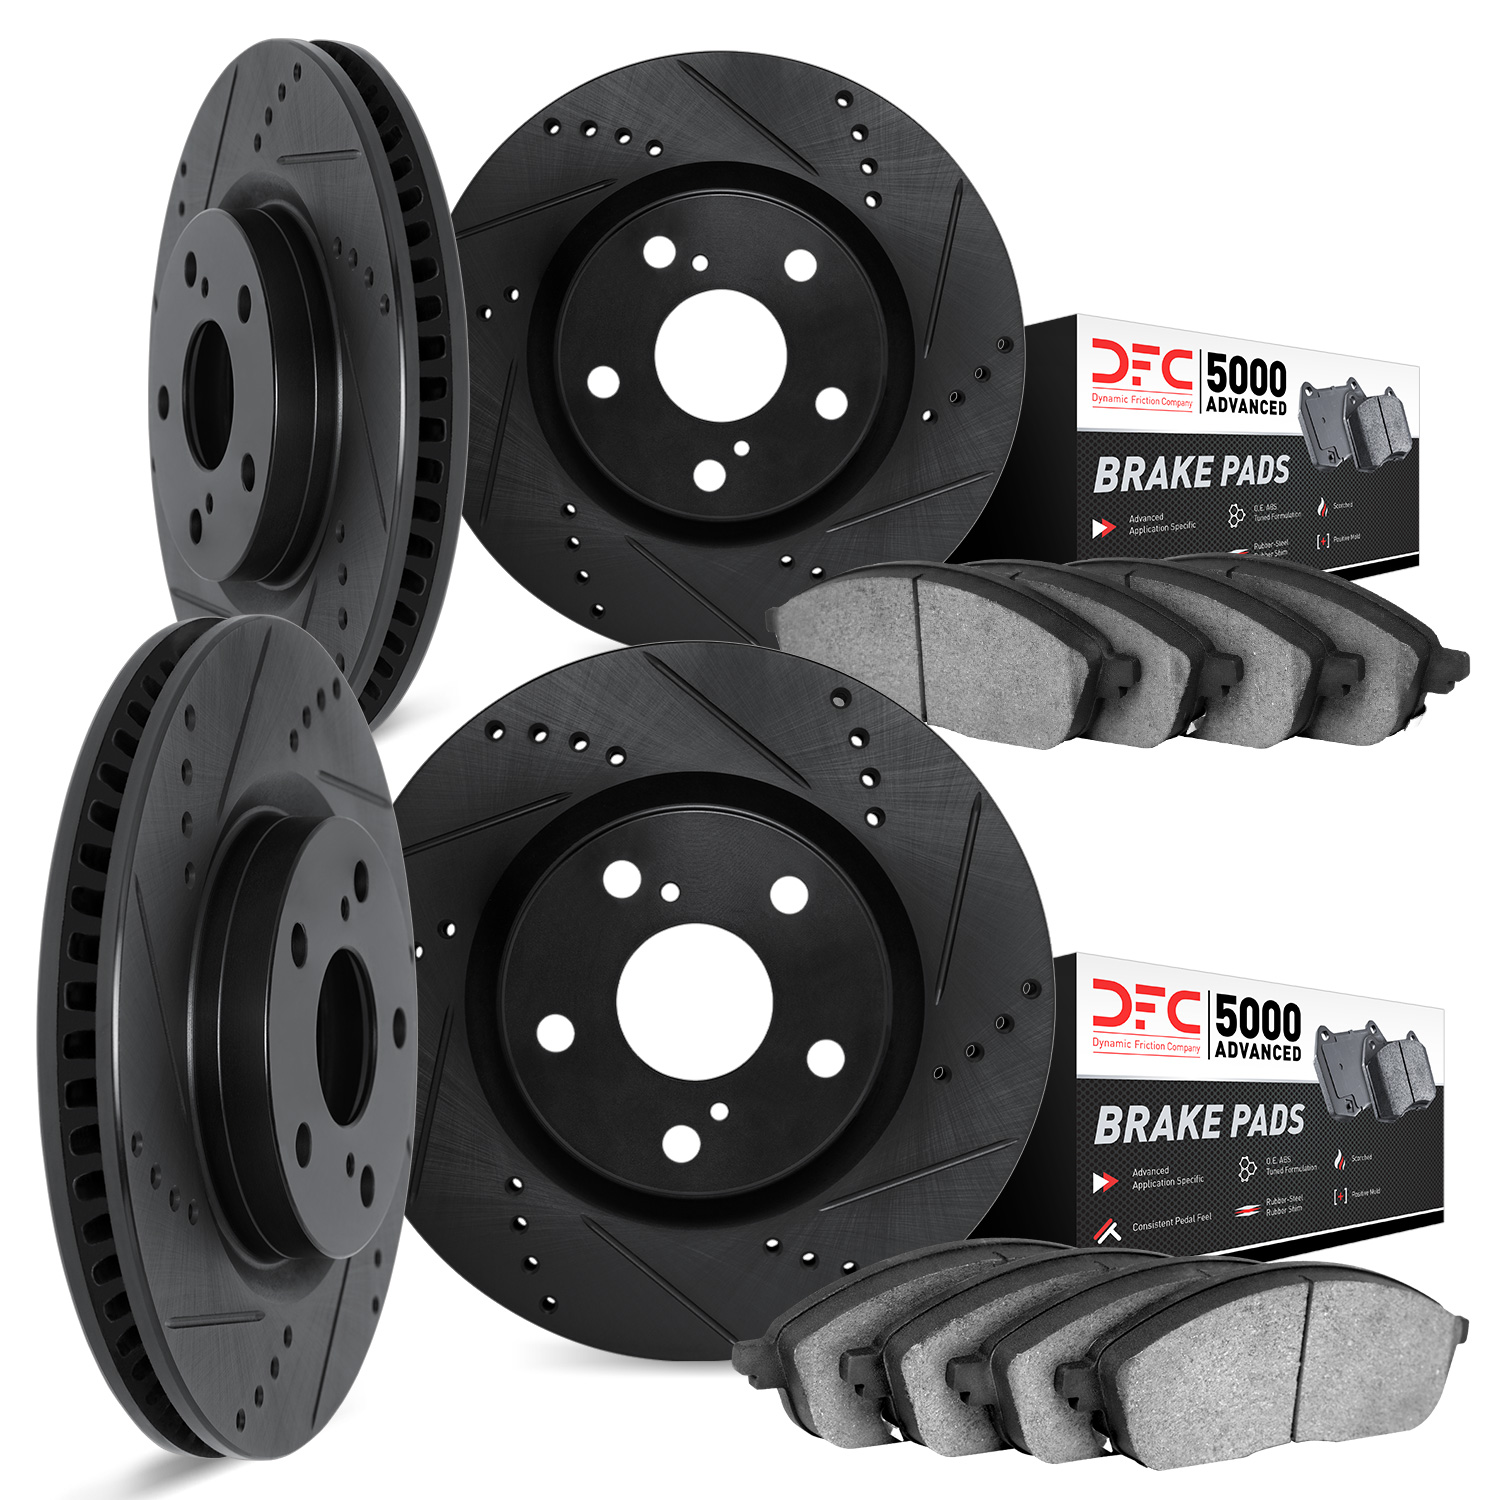 8504-31027 Drilled/Slotted Brake Rotors w/5000 Advanced Brake Pads Kit [Black], 2010-2015 BMW, Position: Front and Rear